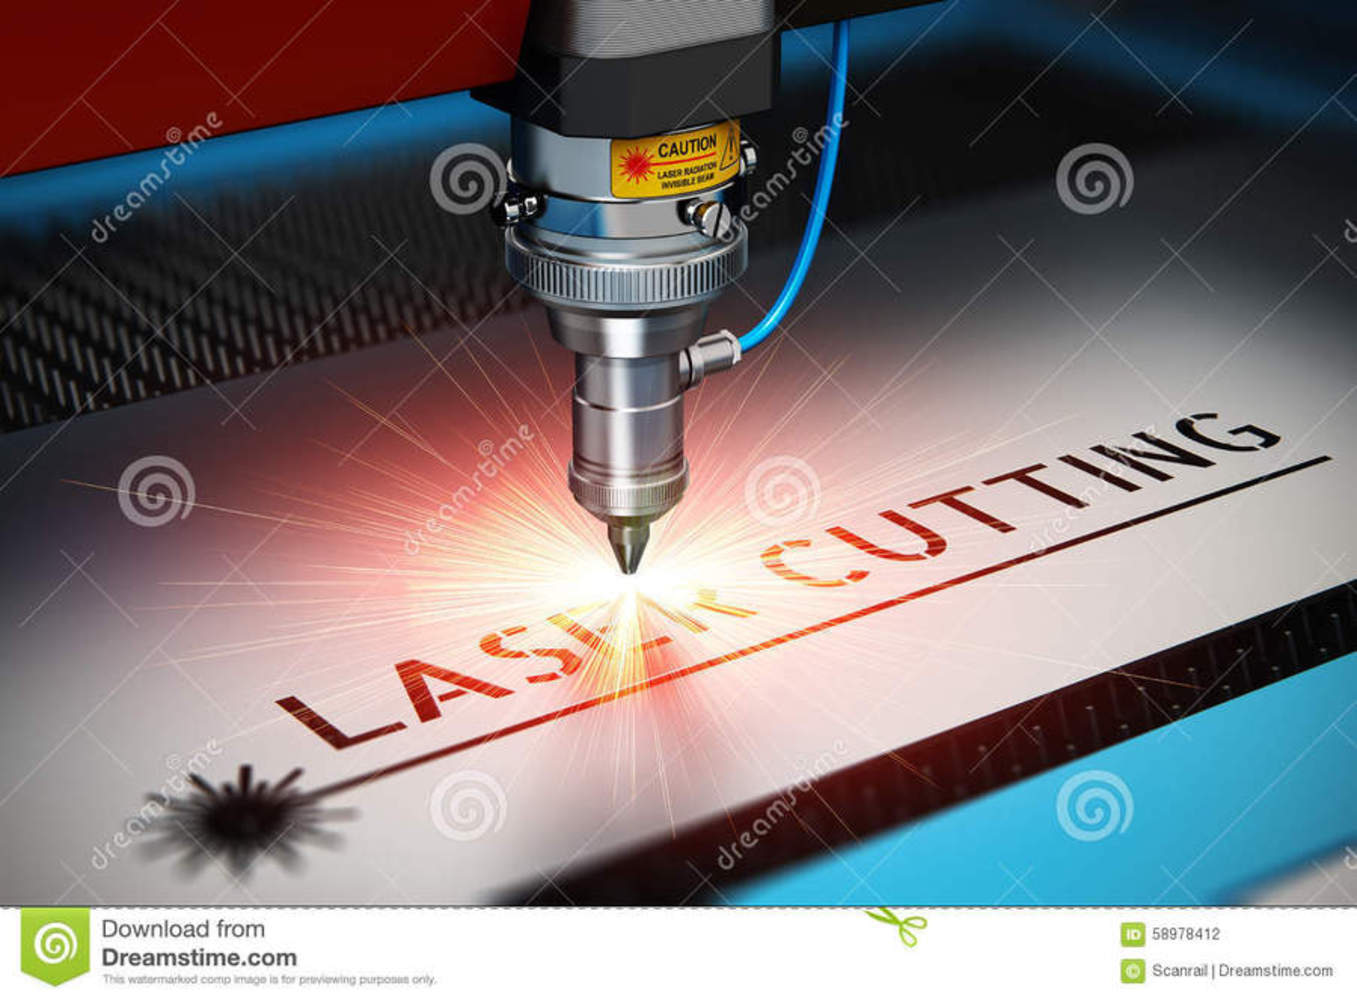 Laser cutting technology metal industry concept macro view industrial digital cnc computer numerical control co invisible beam 58978412.thumb